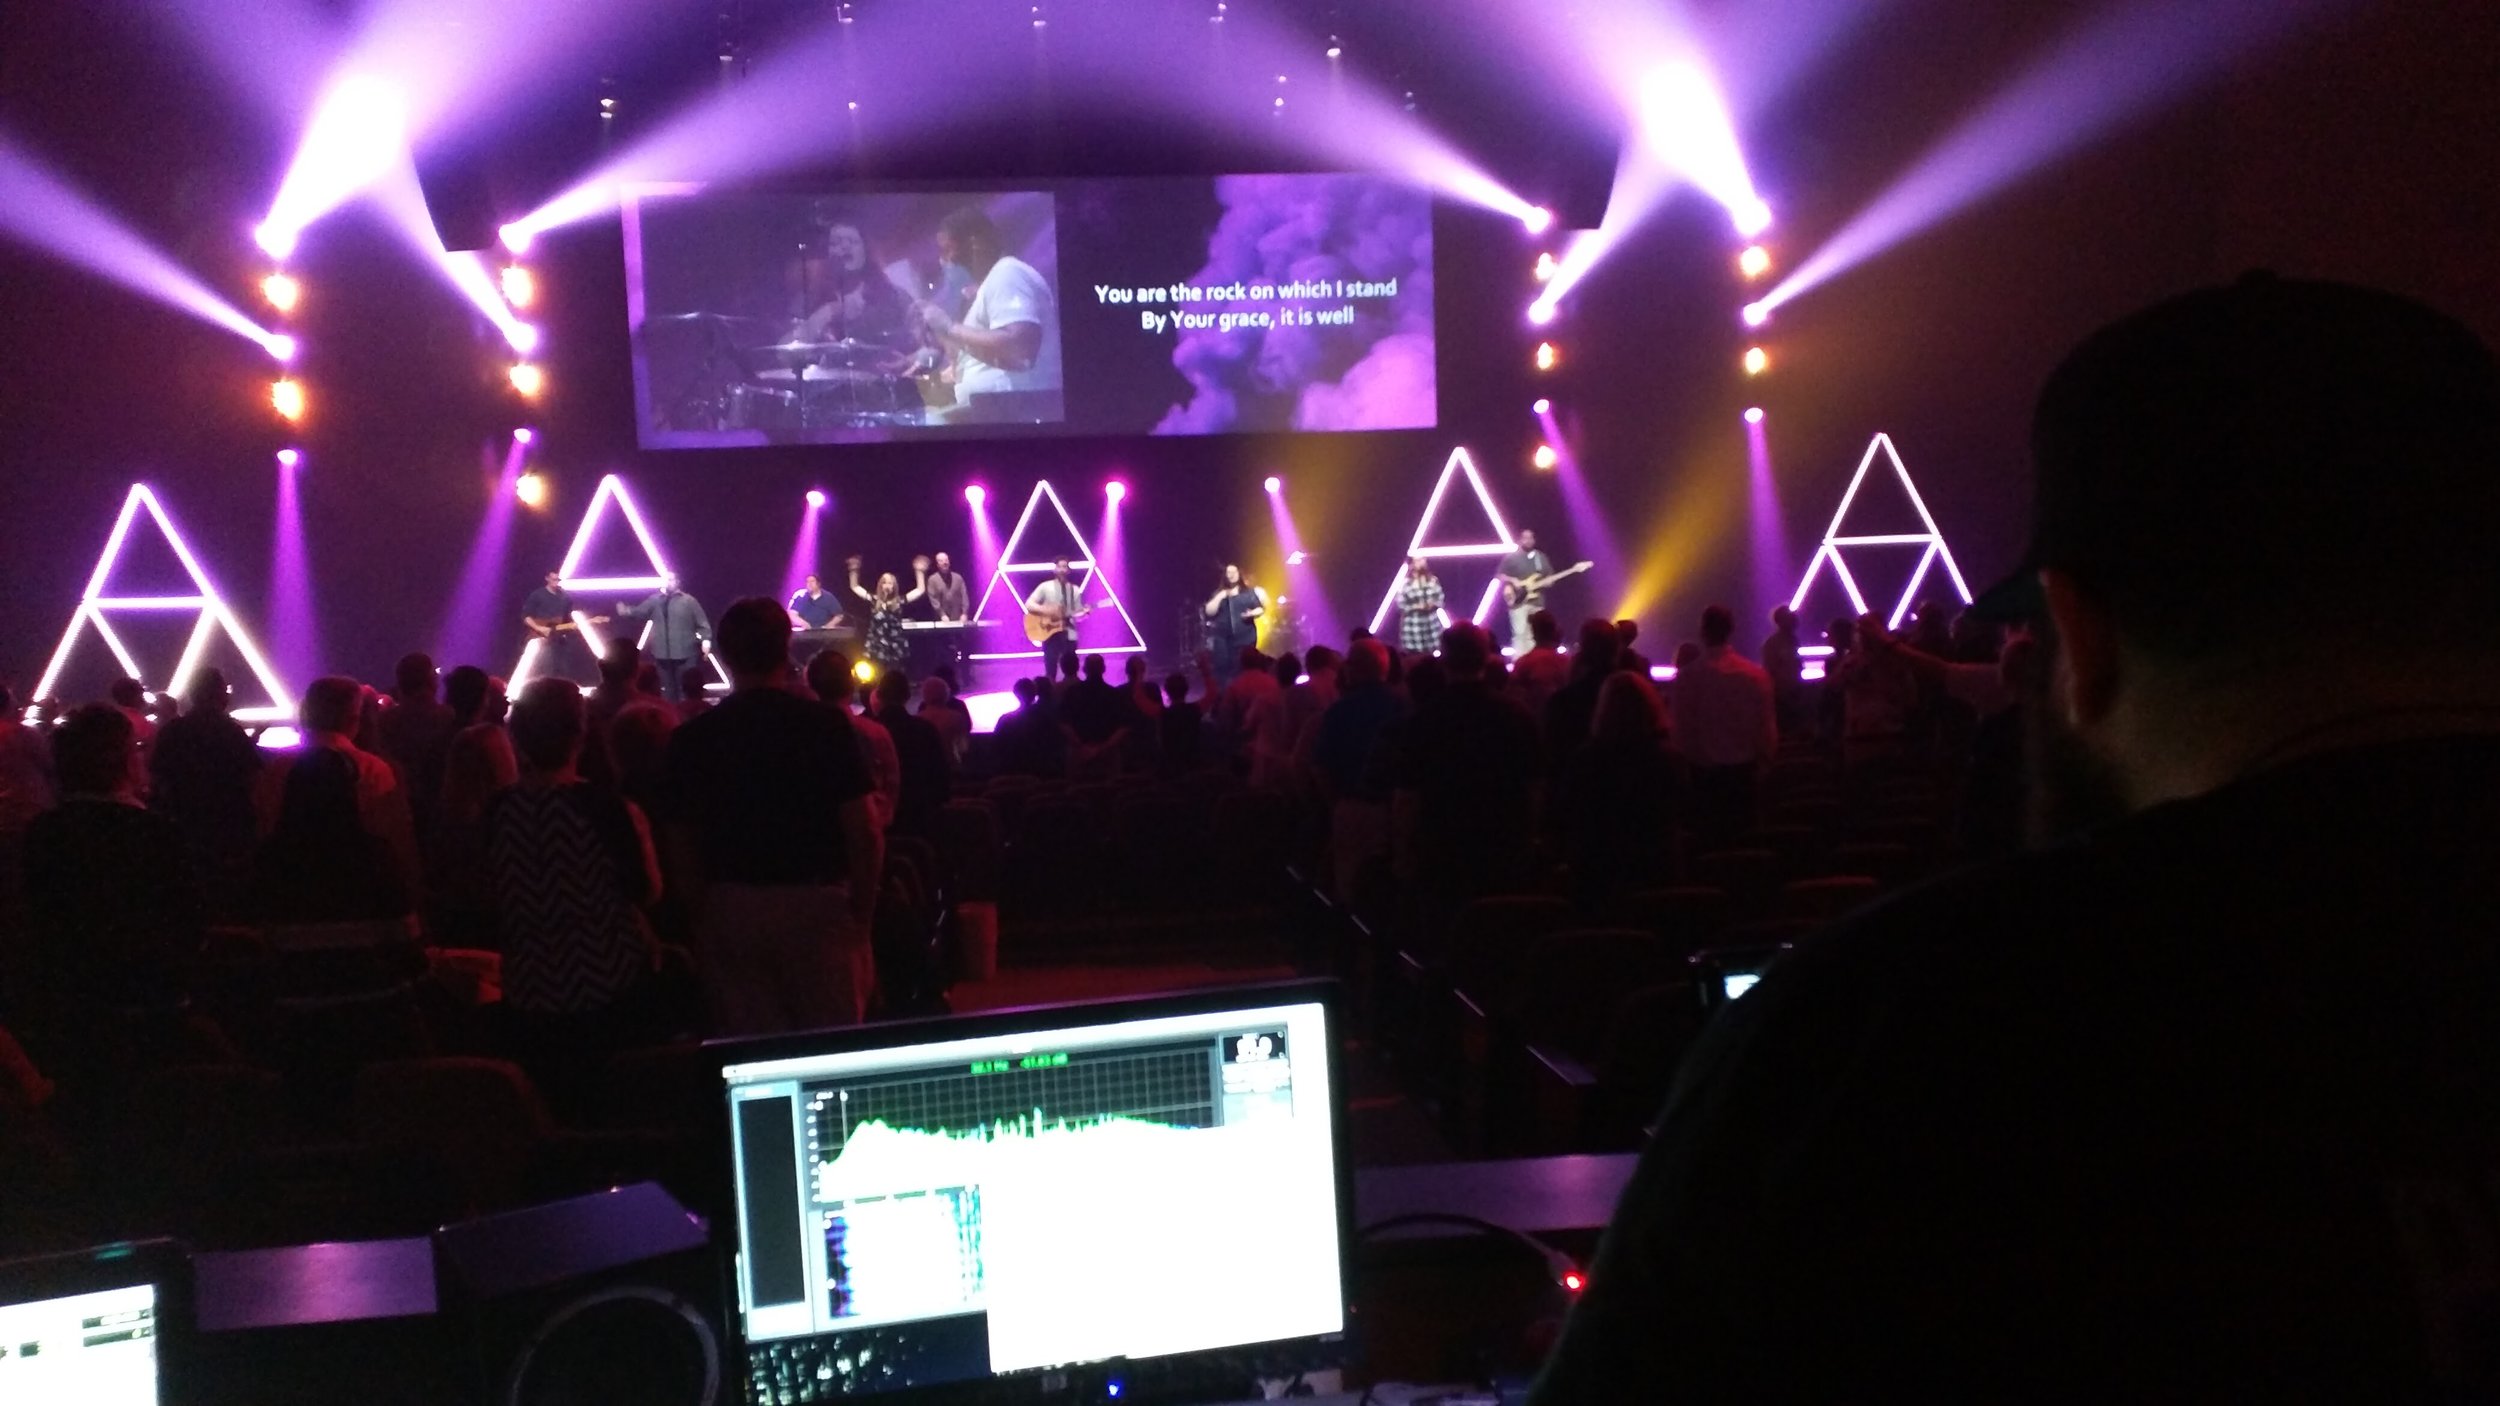 Worked with the audio team at the Worship Center in Lancaster, PA